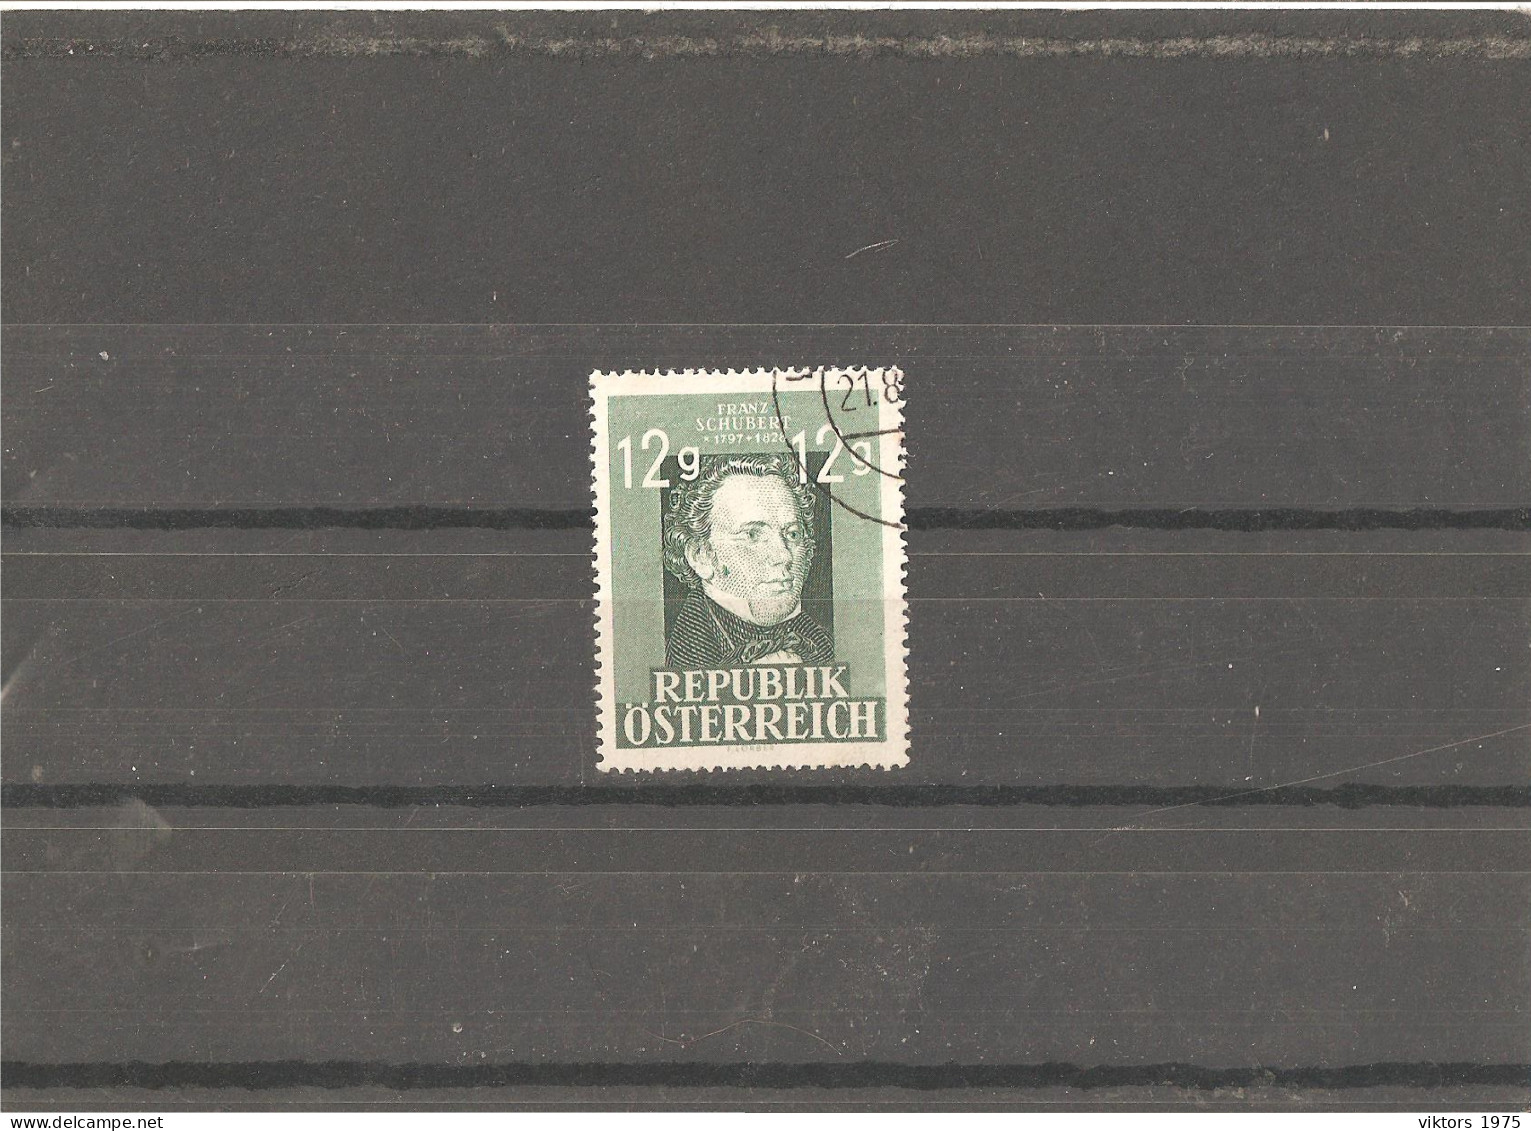 Used Stamp Nr.801 In MICHEL Catalog - Used Stamps